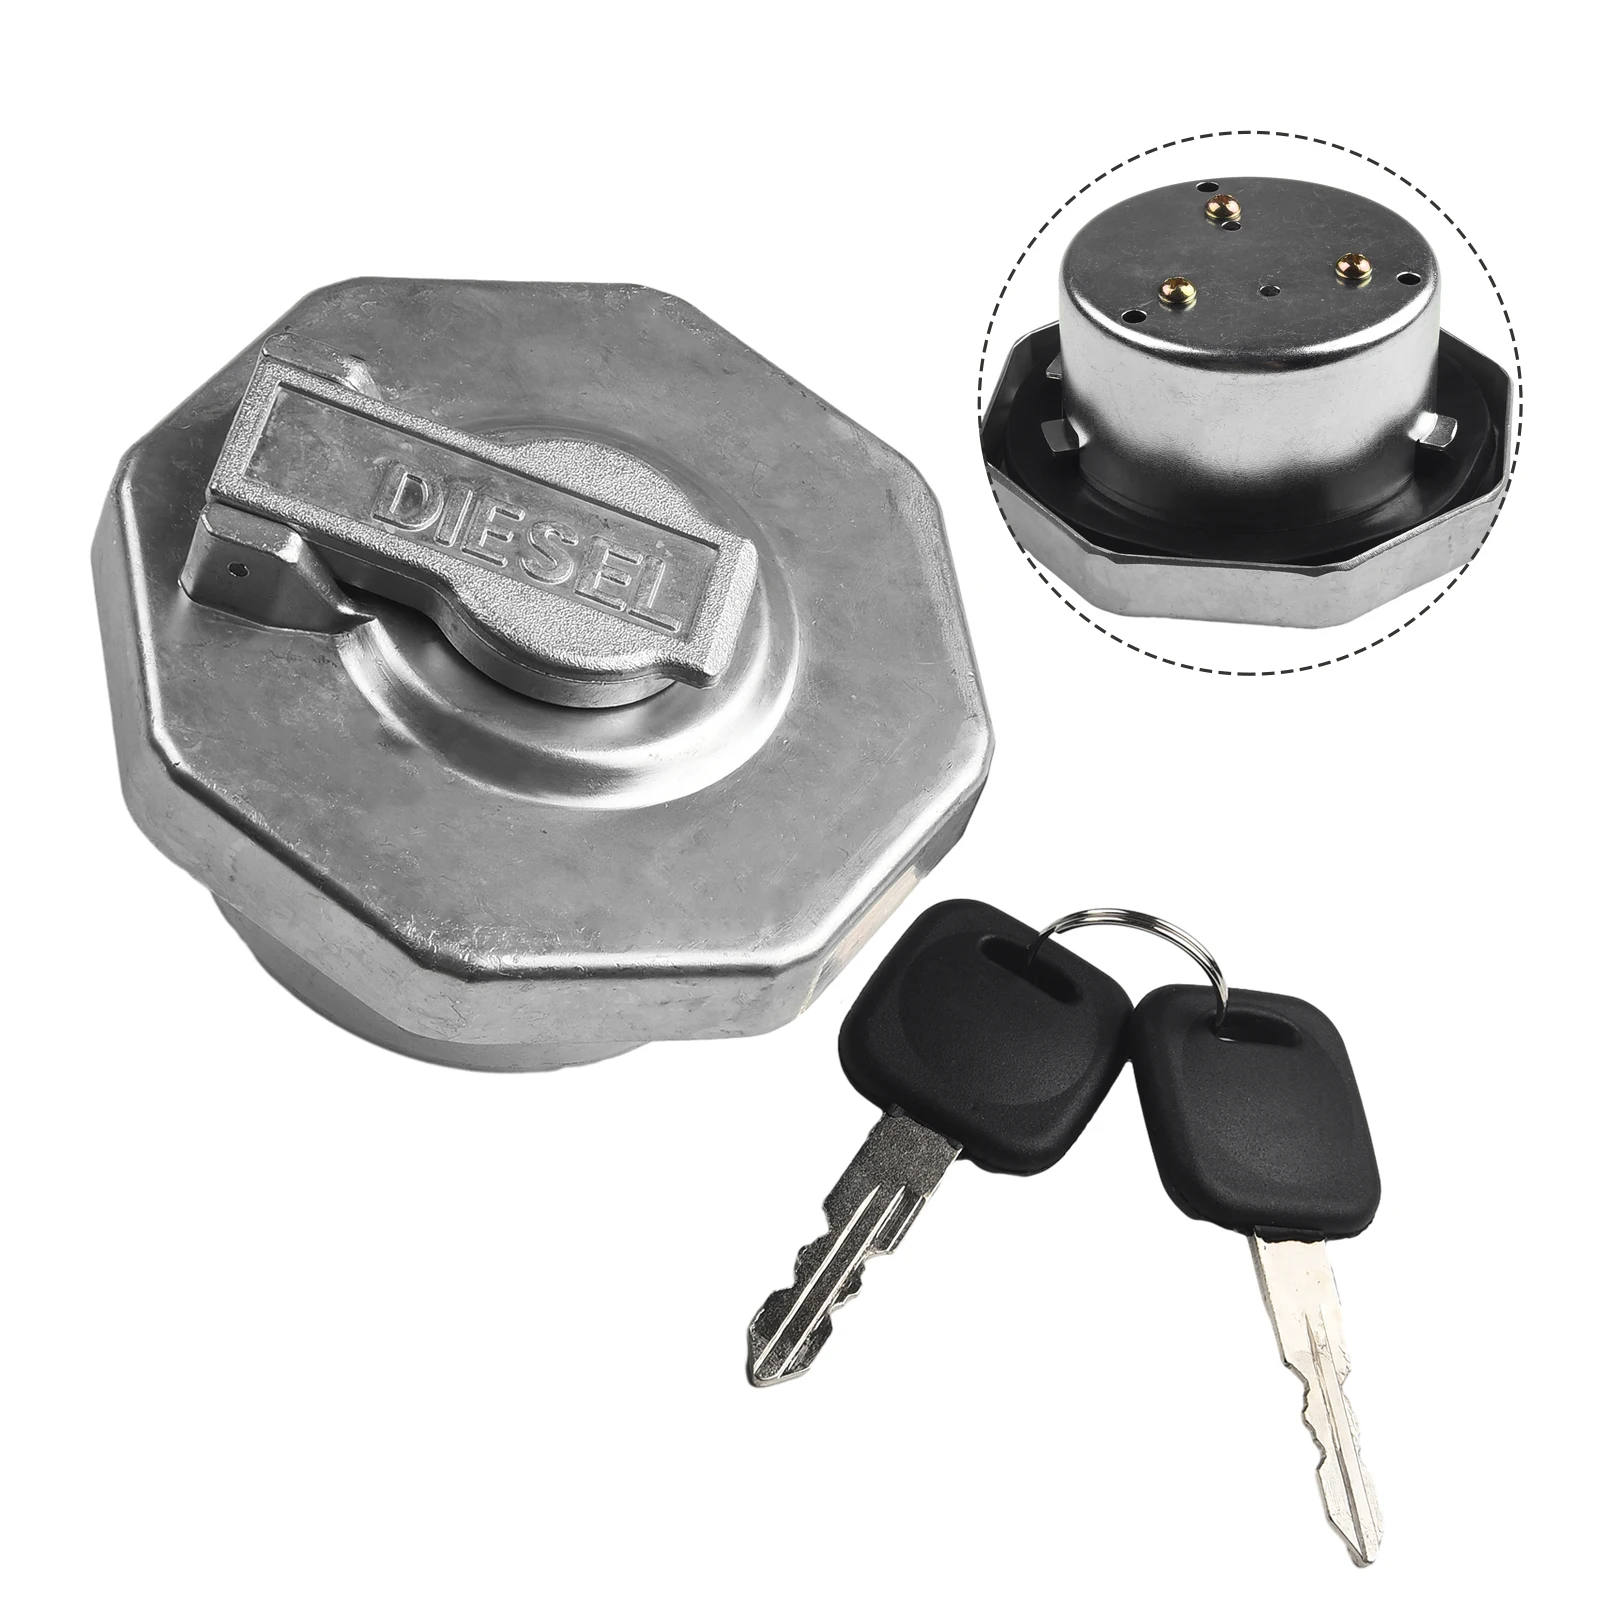 

Durable Replacement Fuel Cap Accessory Assembly Car Easy Installation For ISUZU ELF NPR NQR 4HK1 With Key 1pcs